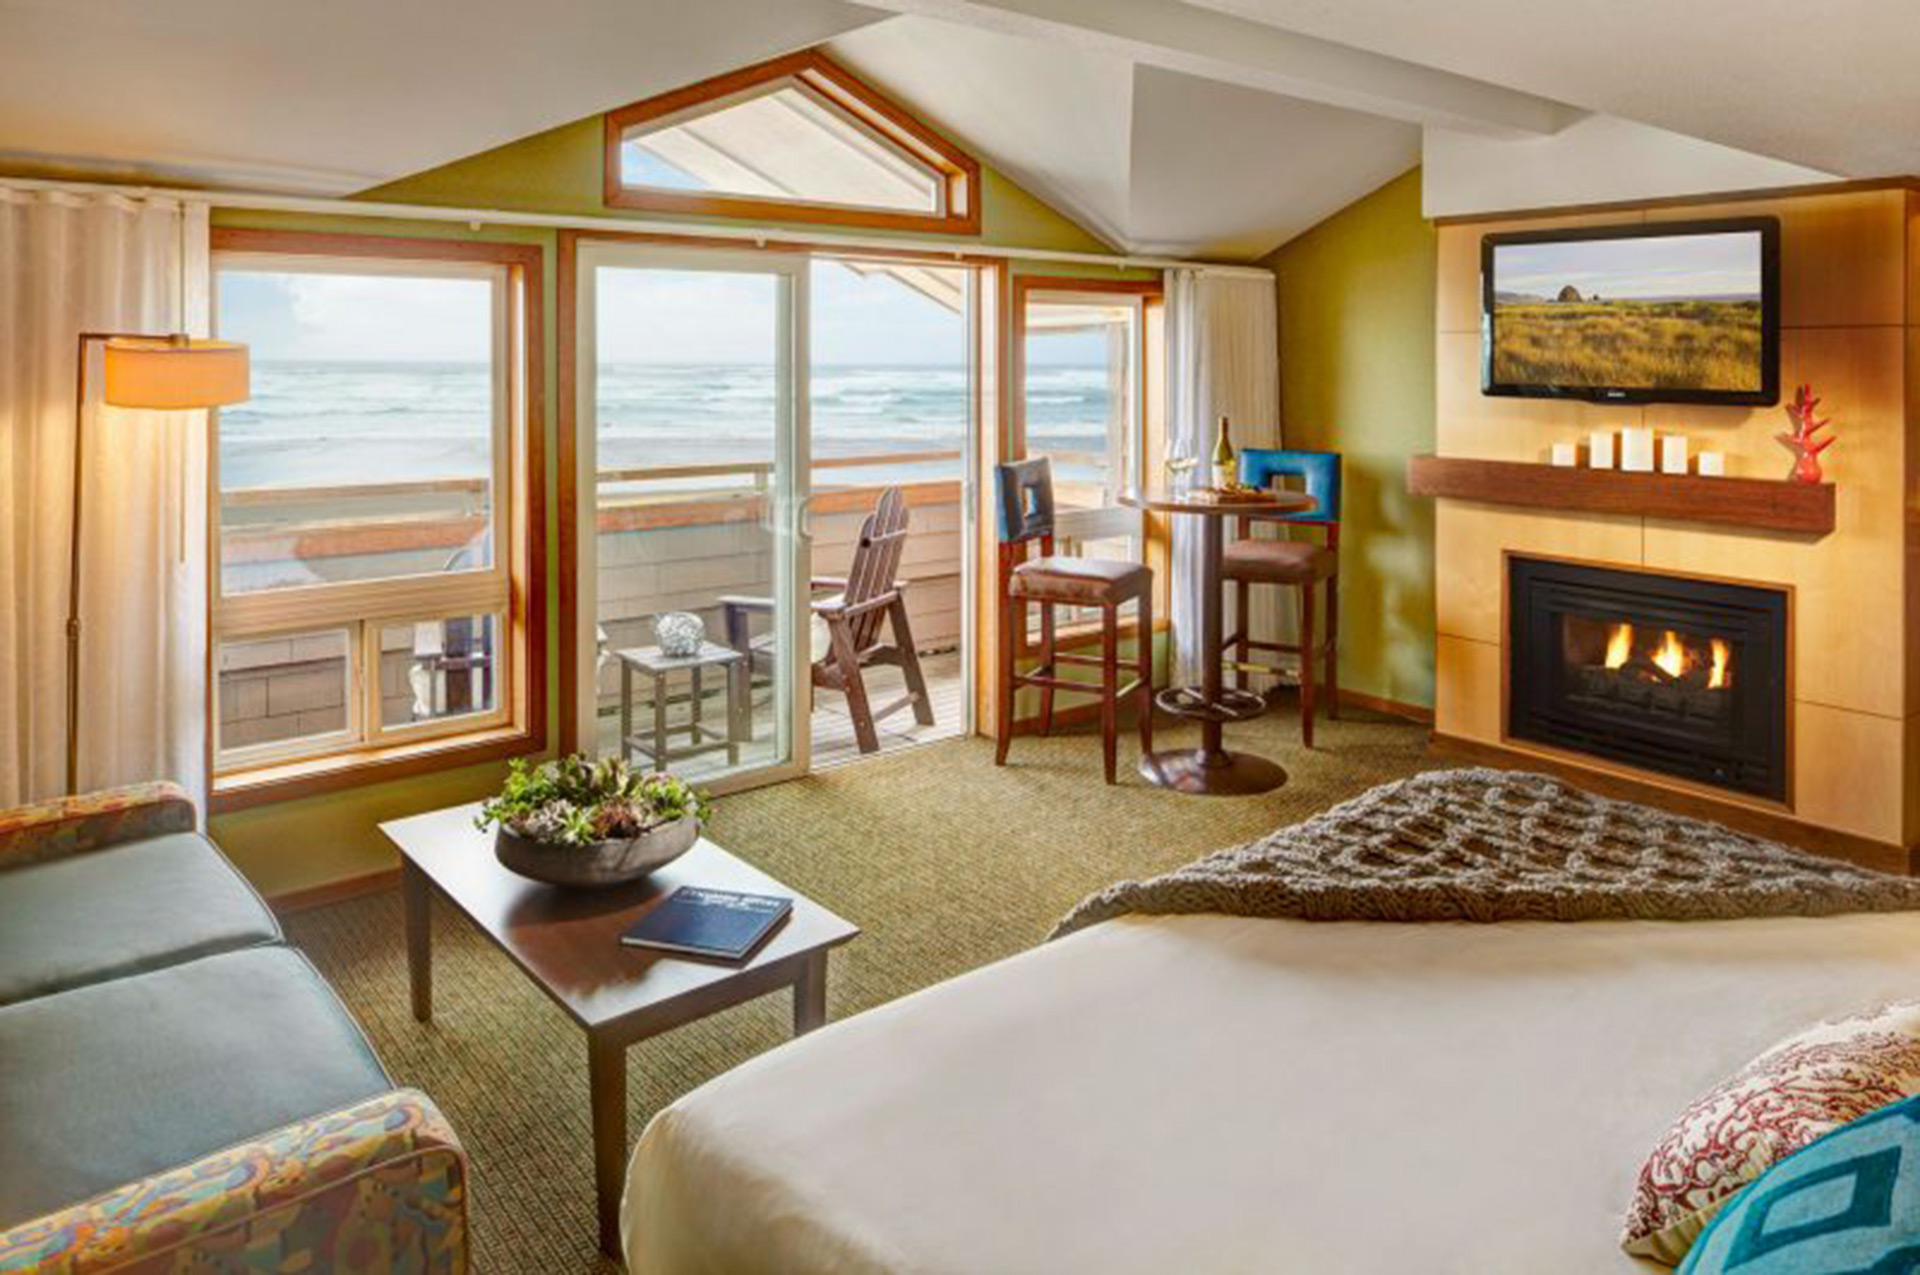 THE SURFSAND RESORT Cannon Beach, OR